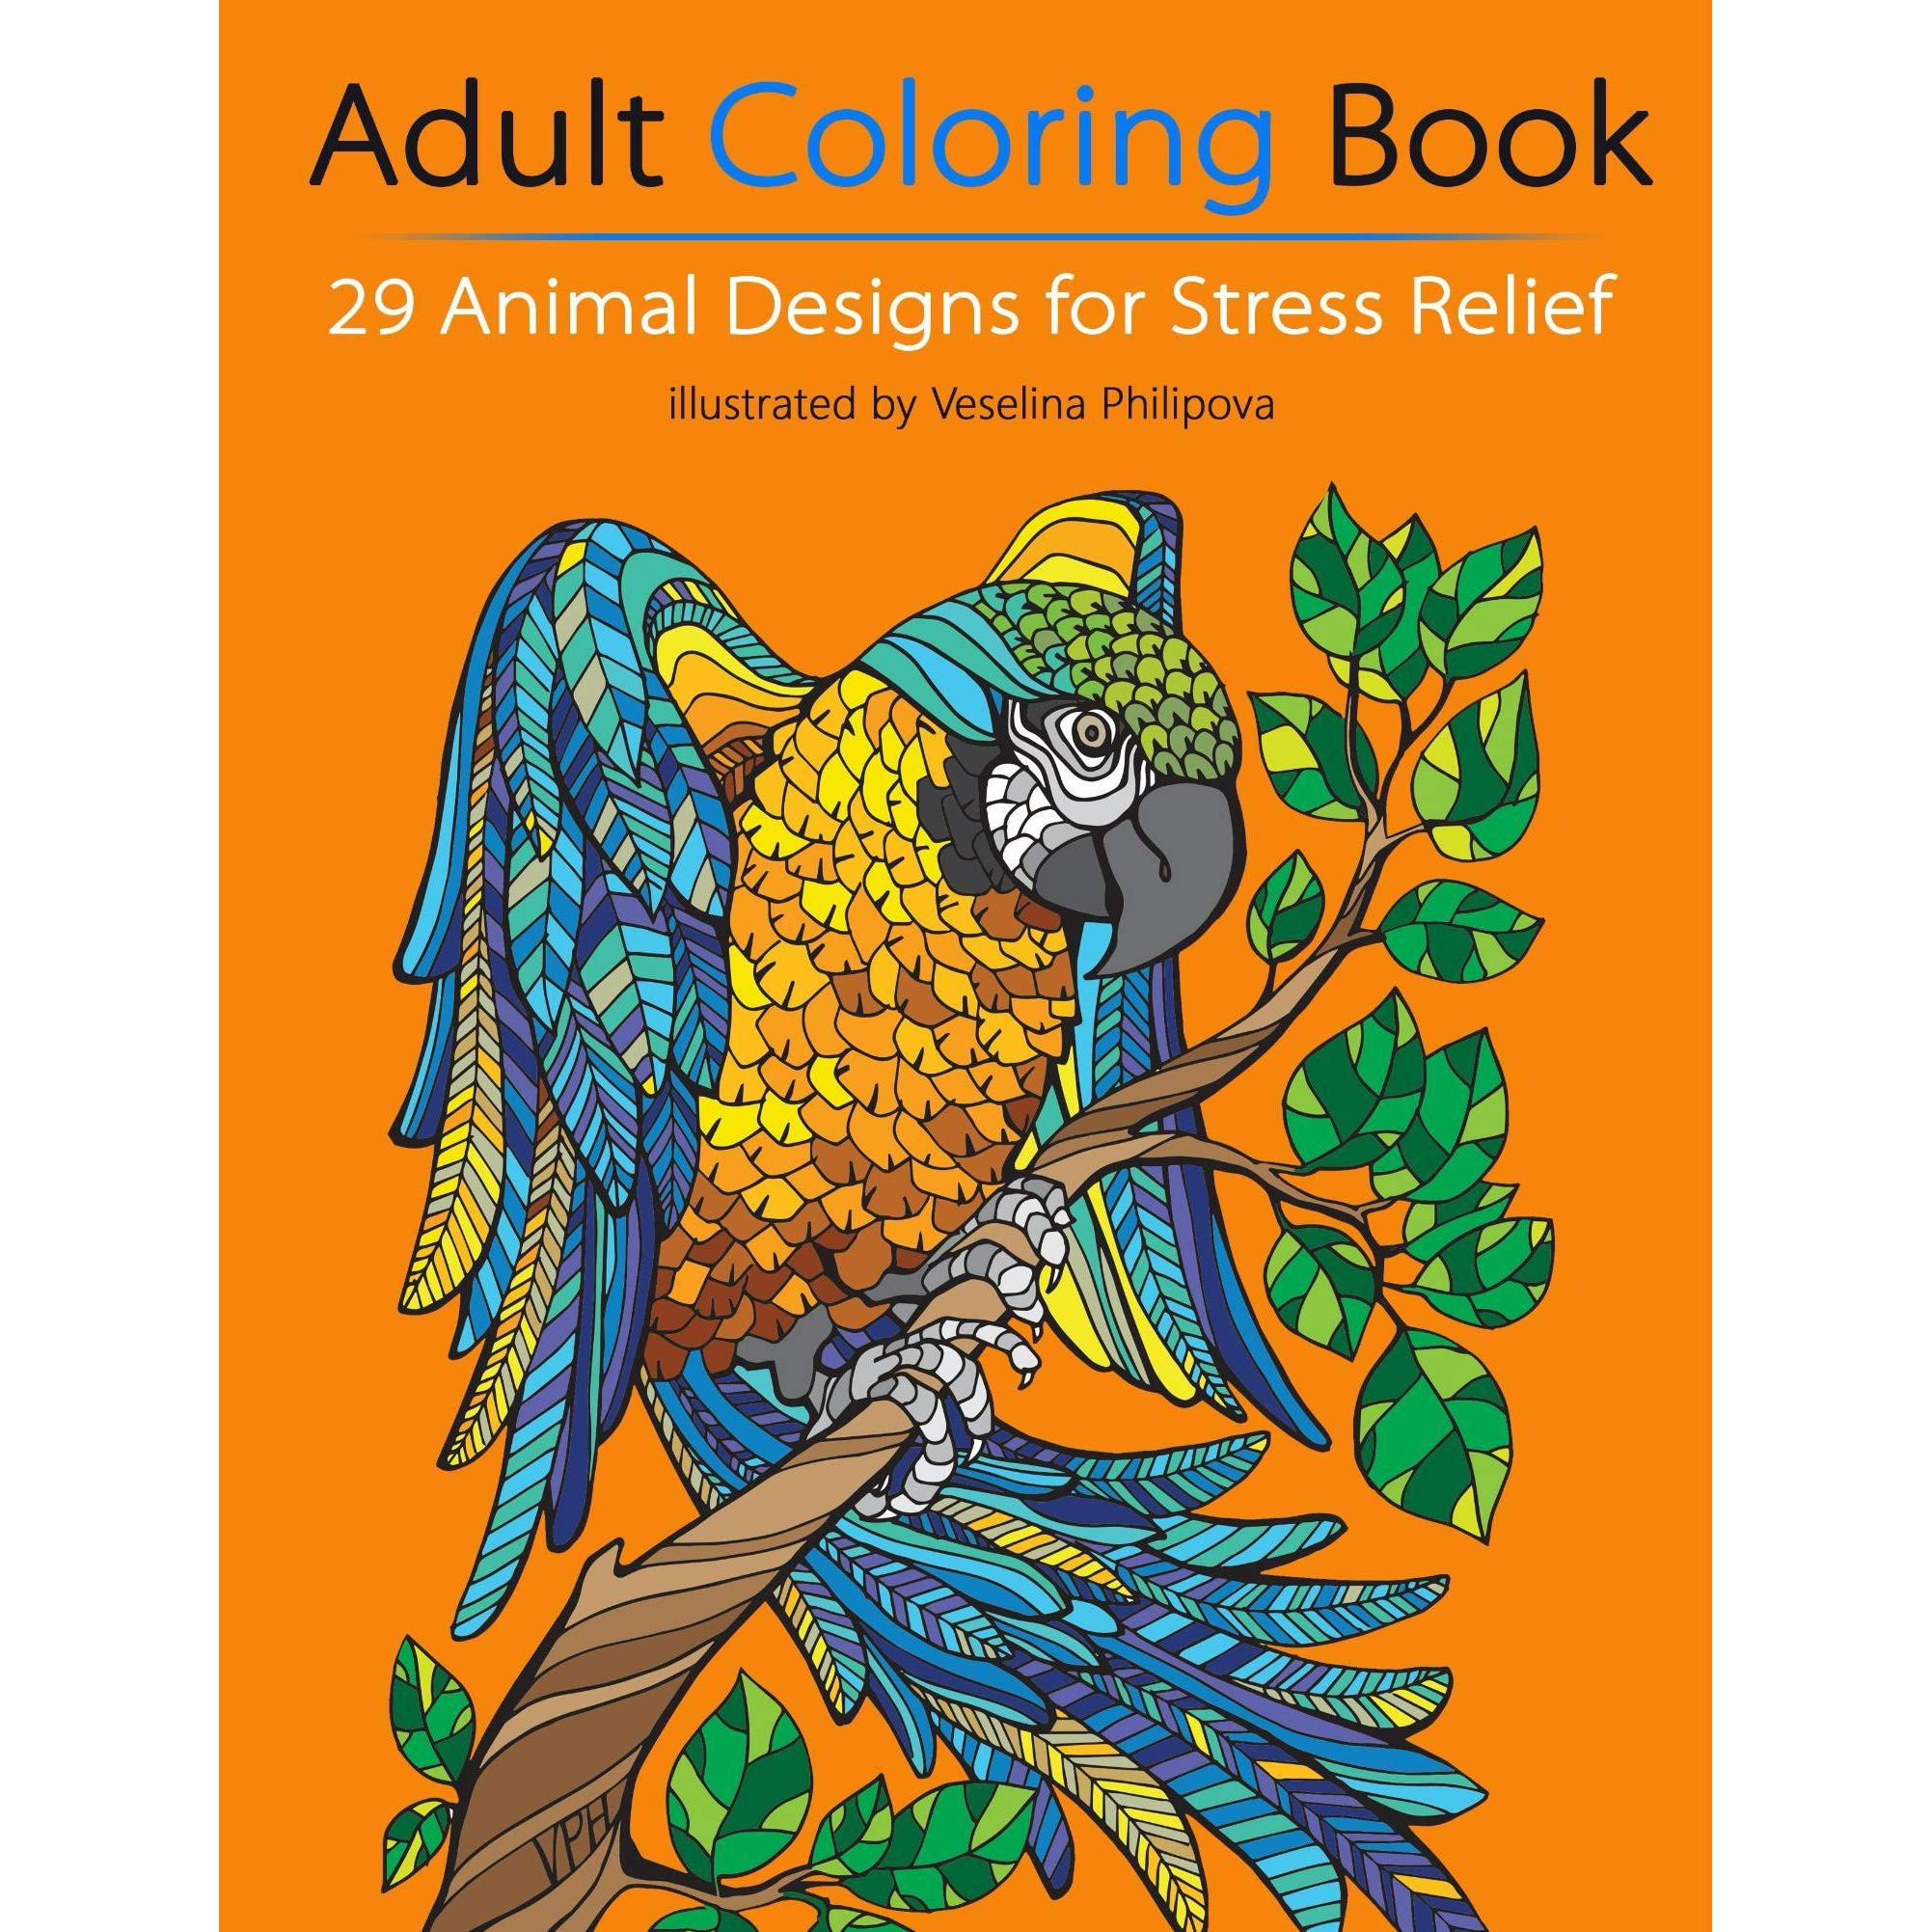 Adult Coloring Book Stress Relieving Animal Designs
 Book giveaway for Adult Coloring Book 29 Animal Designs